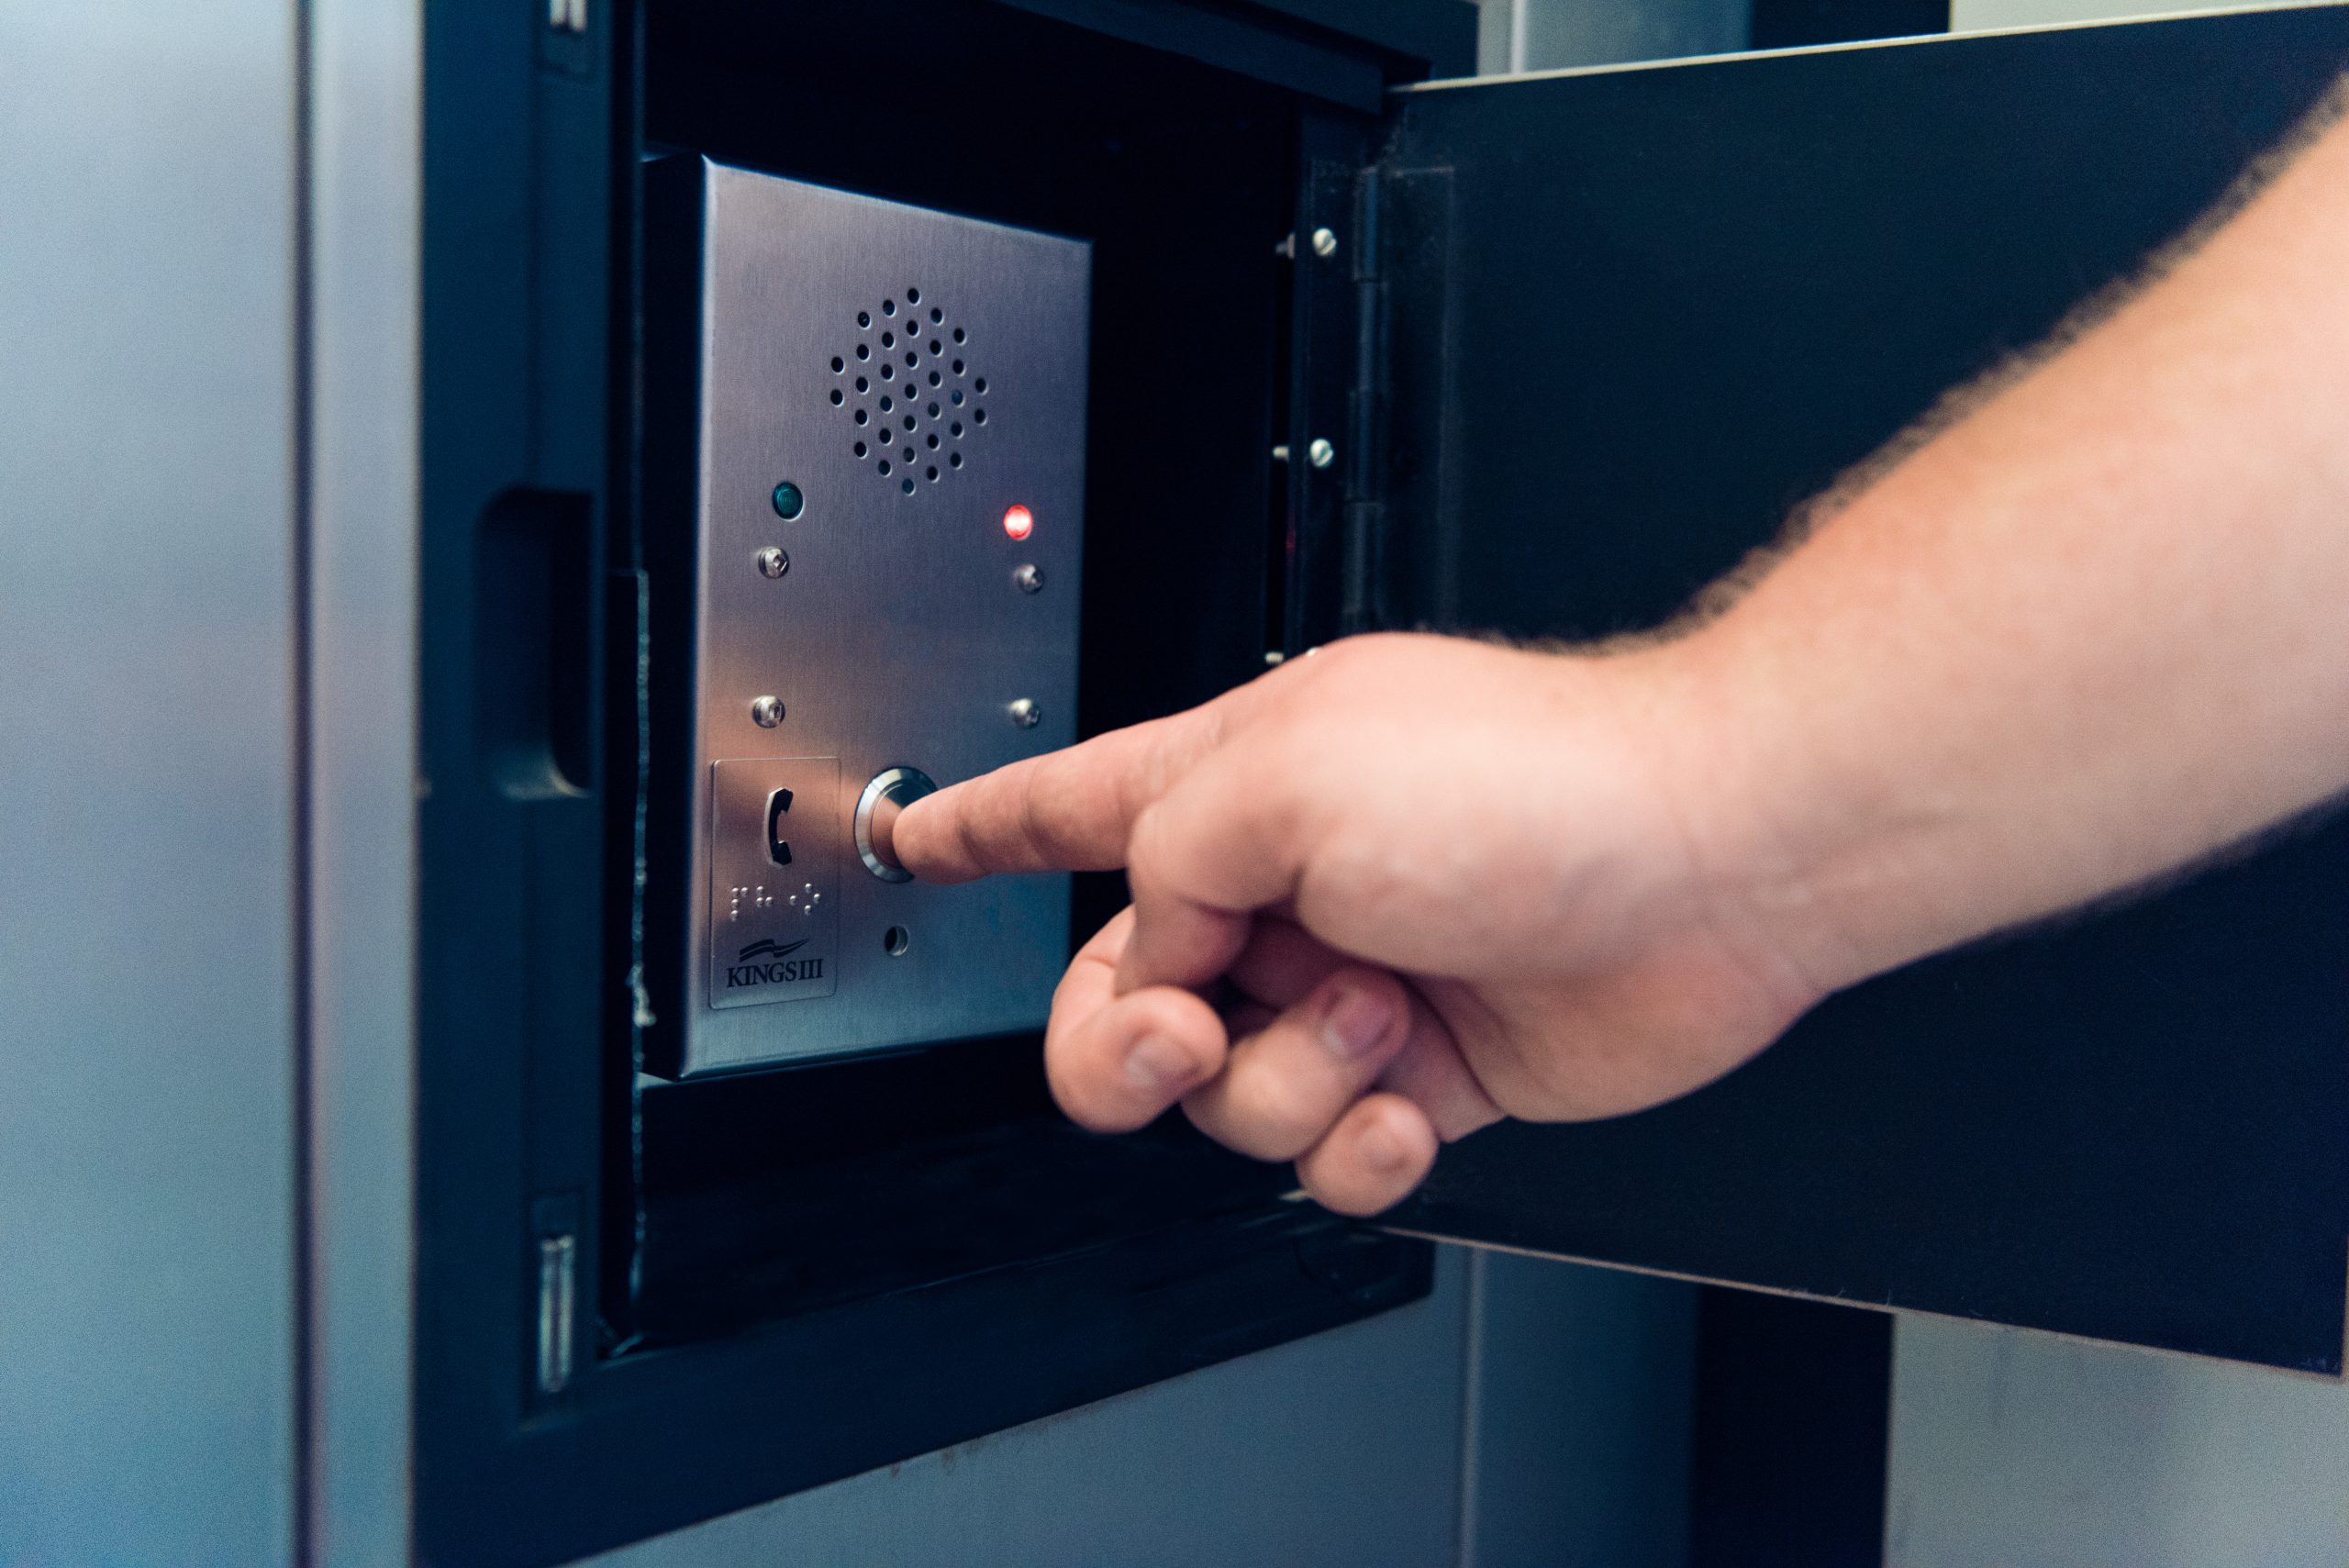 a hand reaches to press a button against the elevator wall to call for an emergency dispatcher